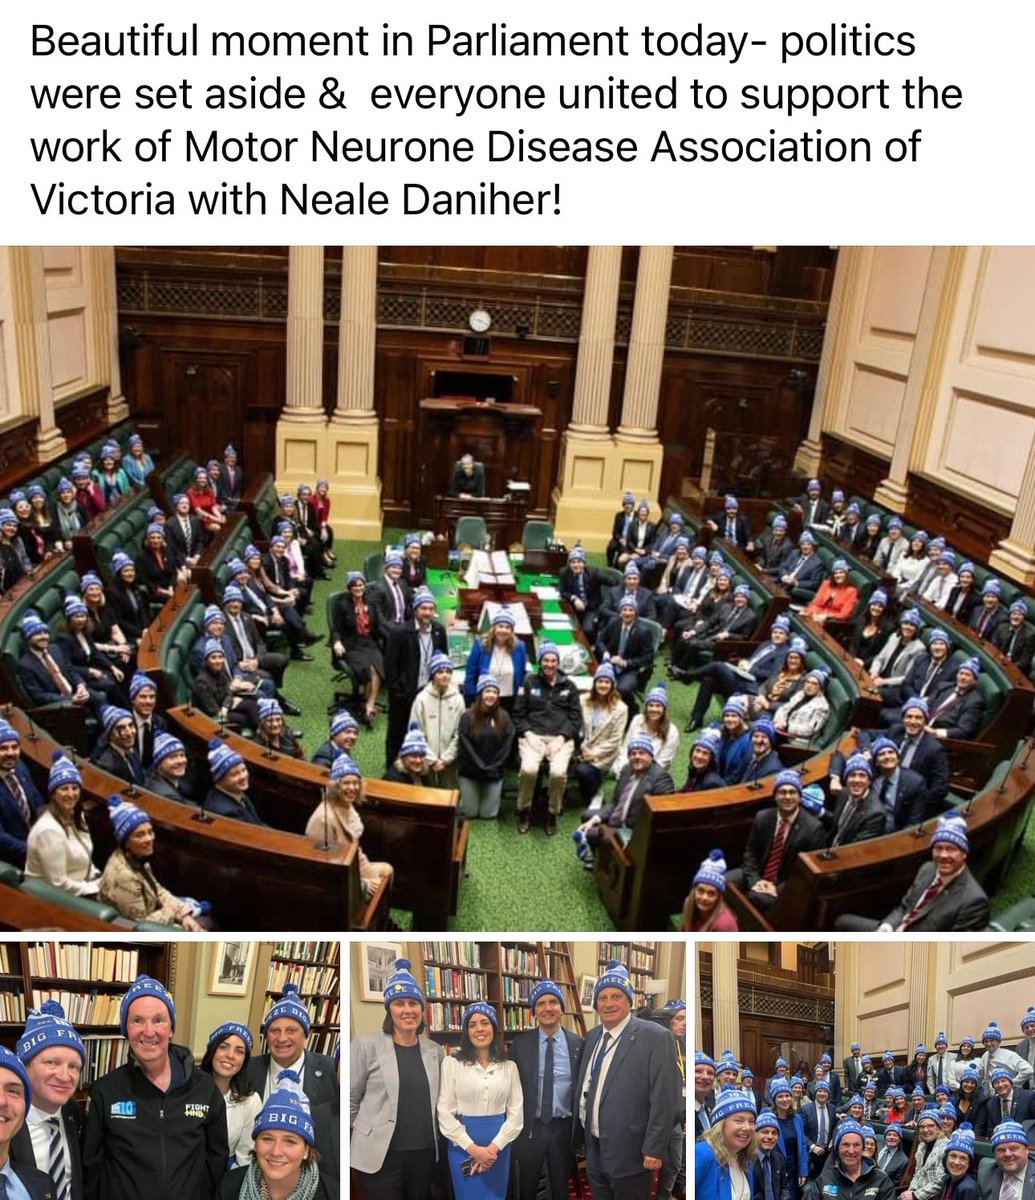 It’s public now, so please head over to support Pakenham MP Emma Vulin’s page - she spoke of her MND diagnosis with such bravery & dignity. We wish her all the best.